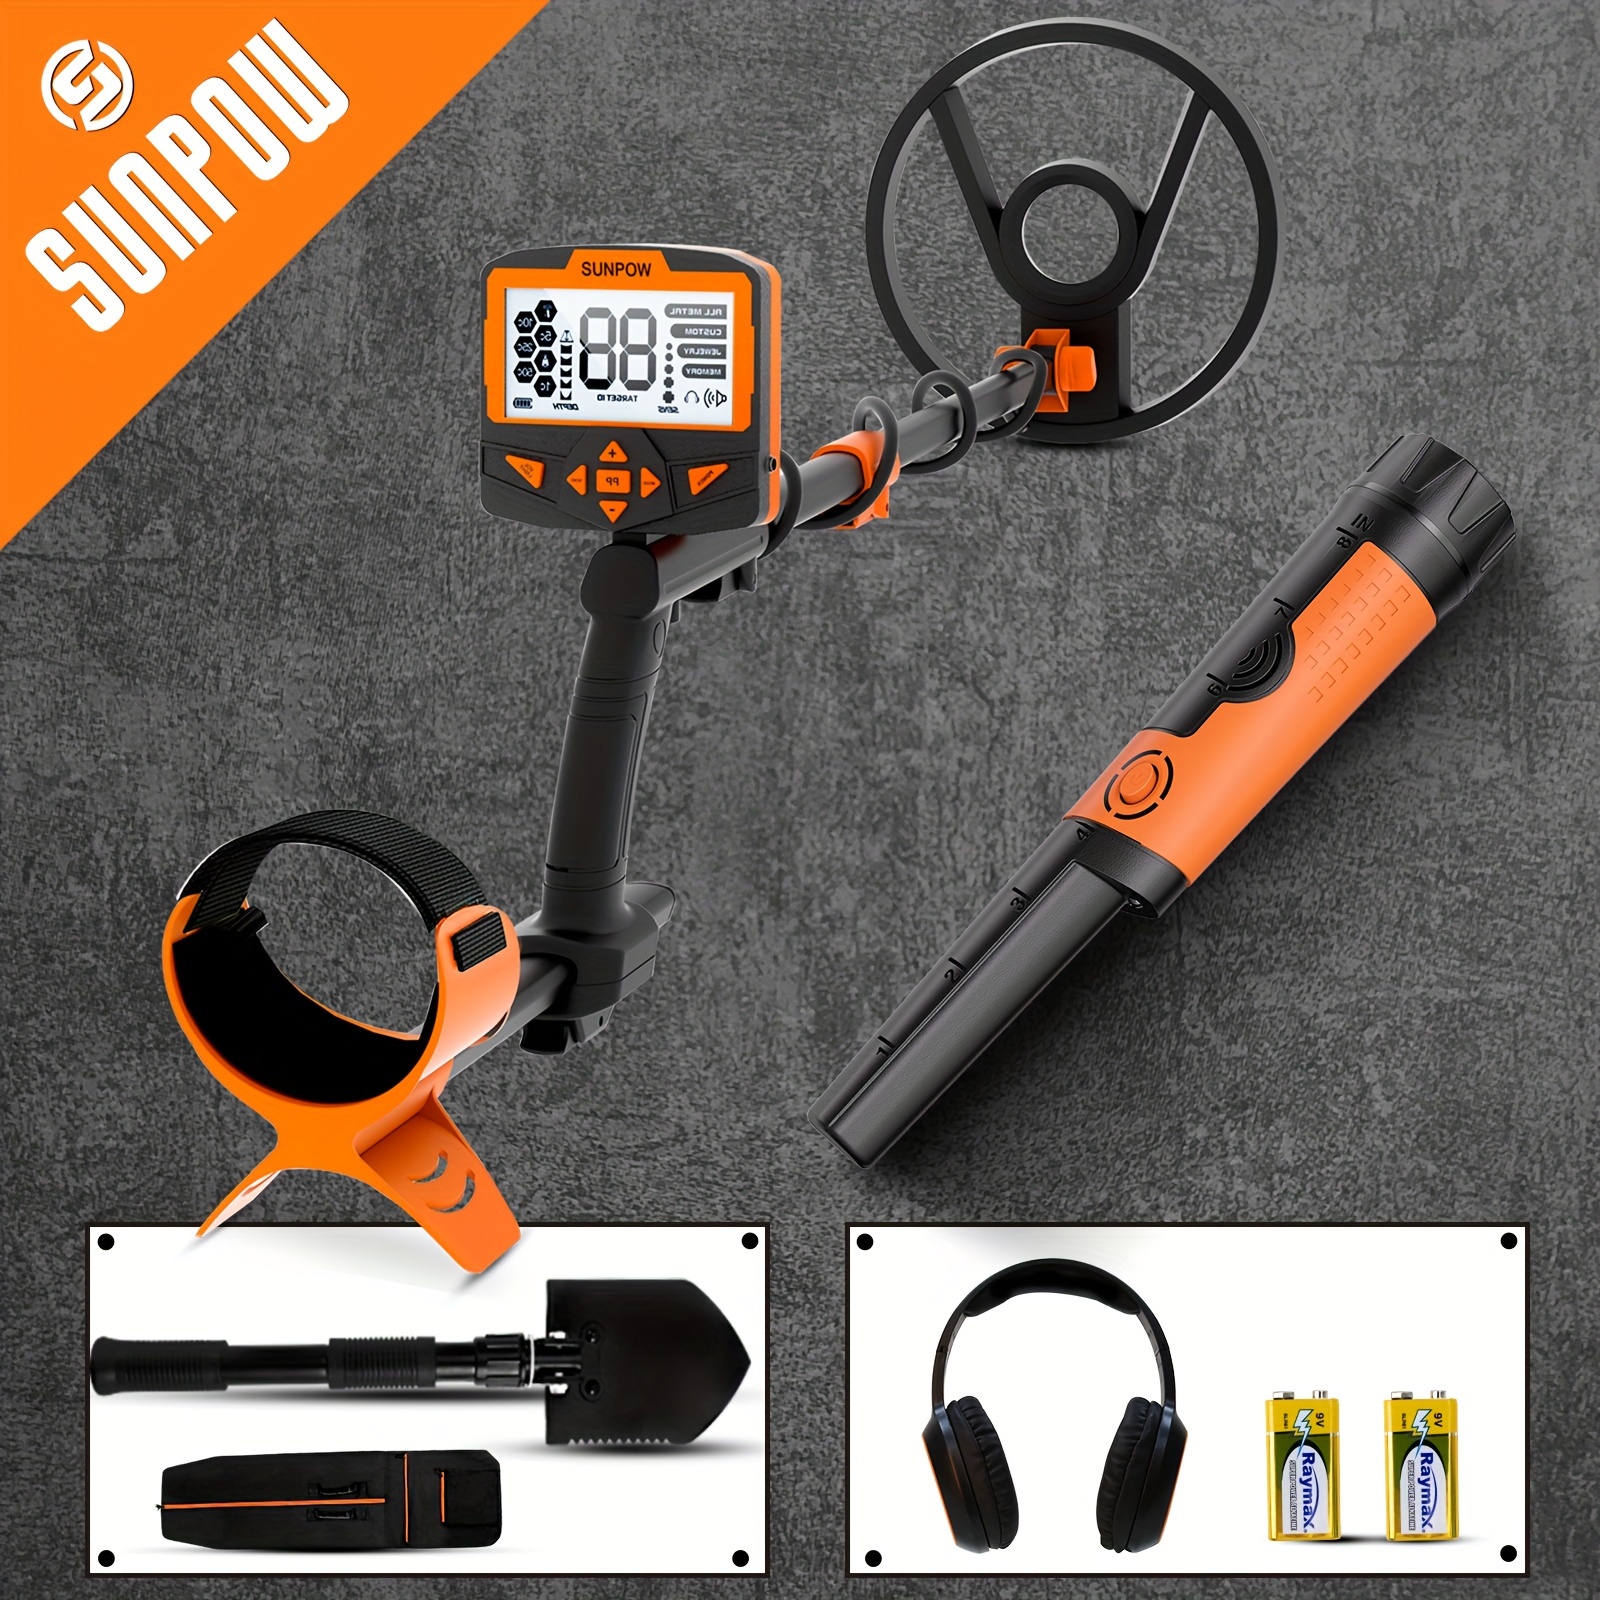 

Sunpow Ultimate 3-in-1 Set Metal Detection Kit With Pinpointer, Premium Digging Tool - The Best Gift For Professional , Precision Pinpointing, And Superior Digging Experience